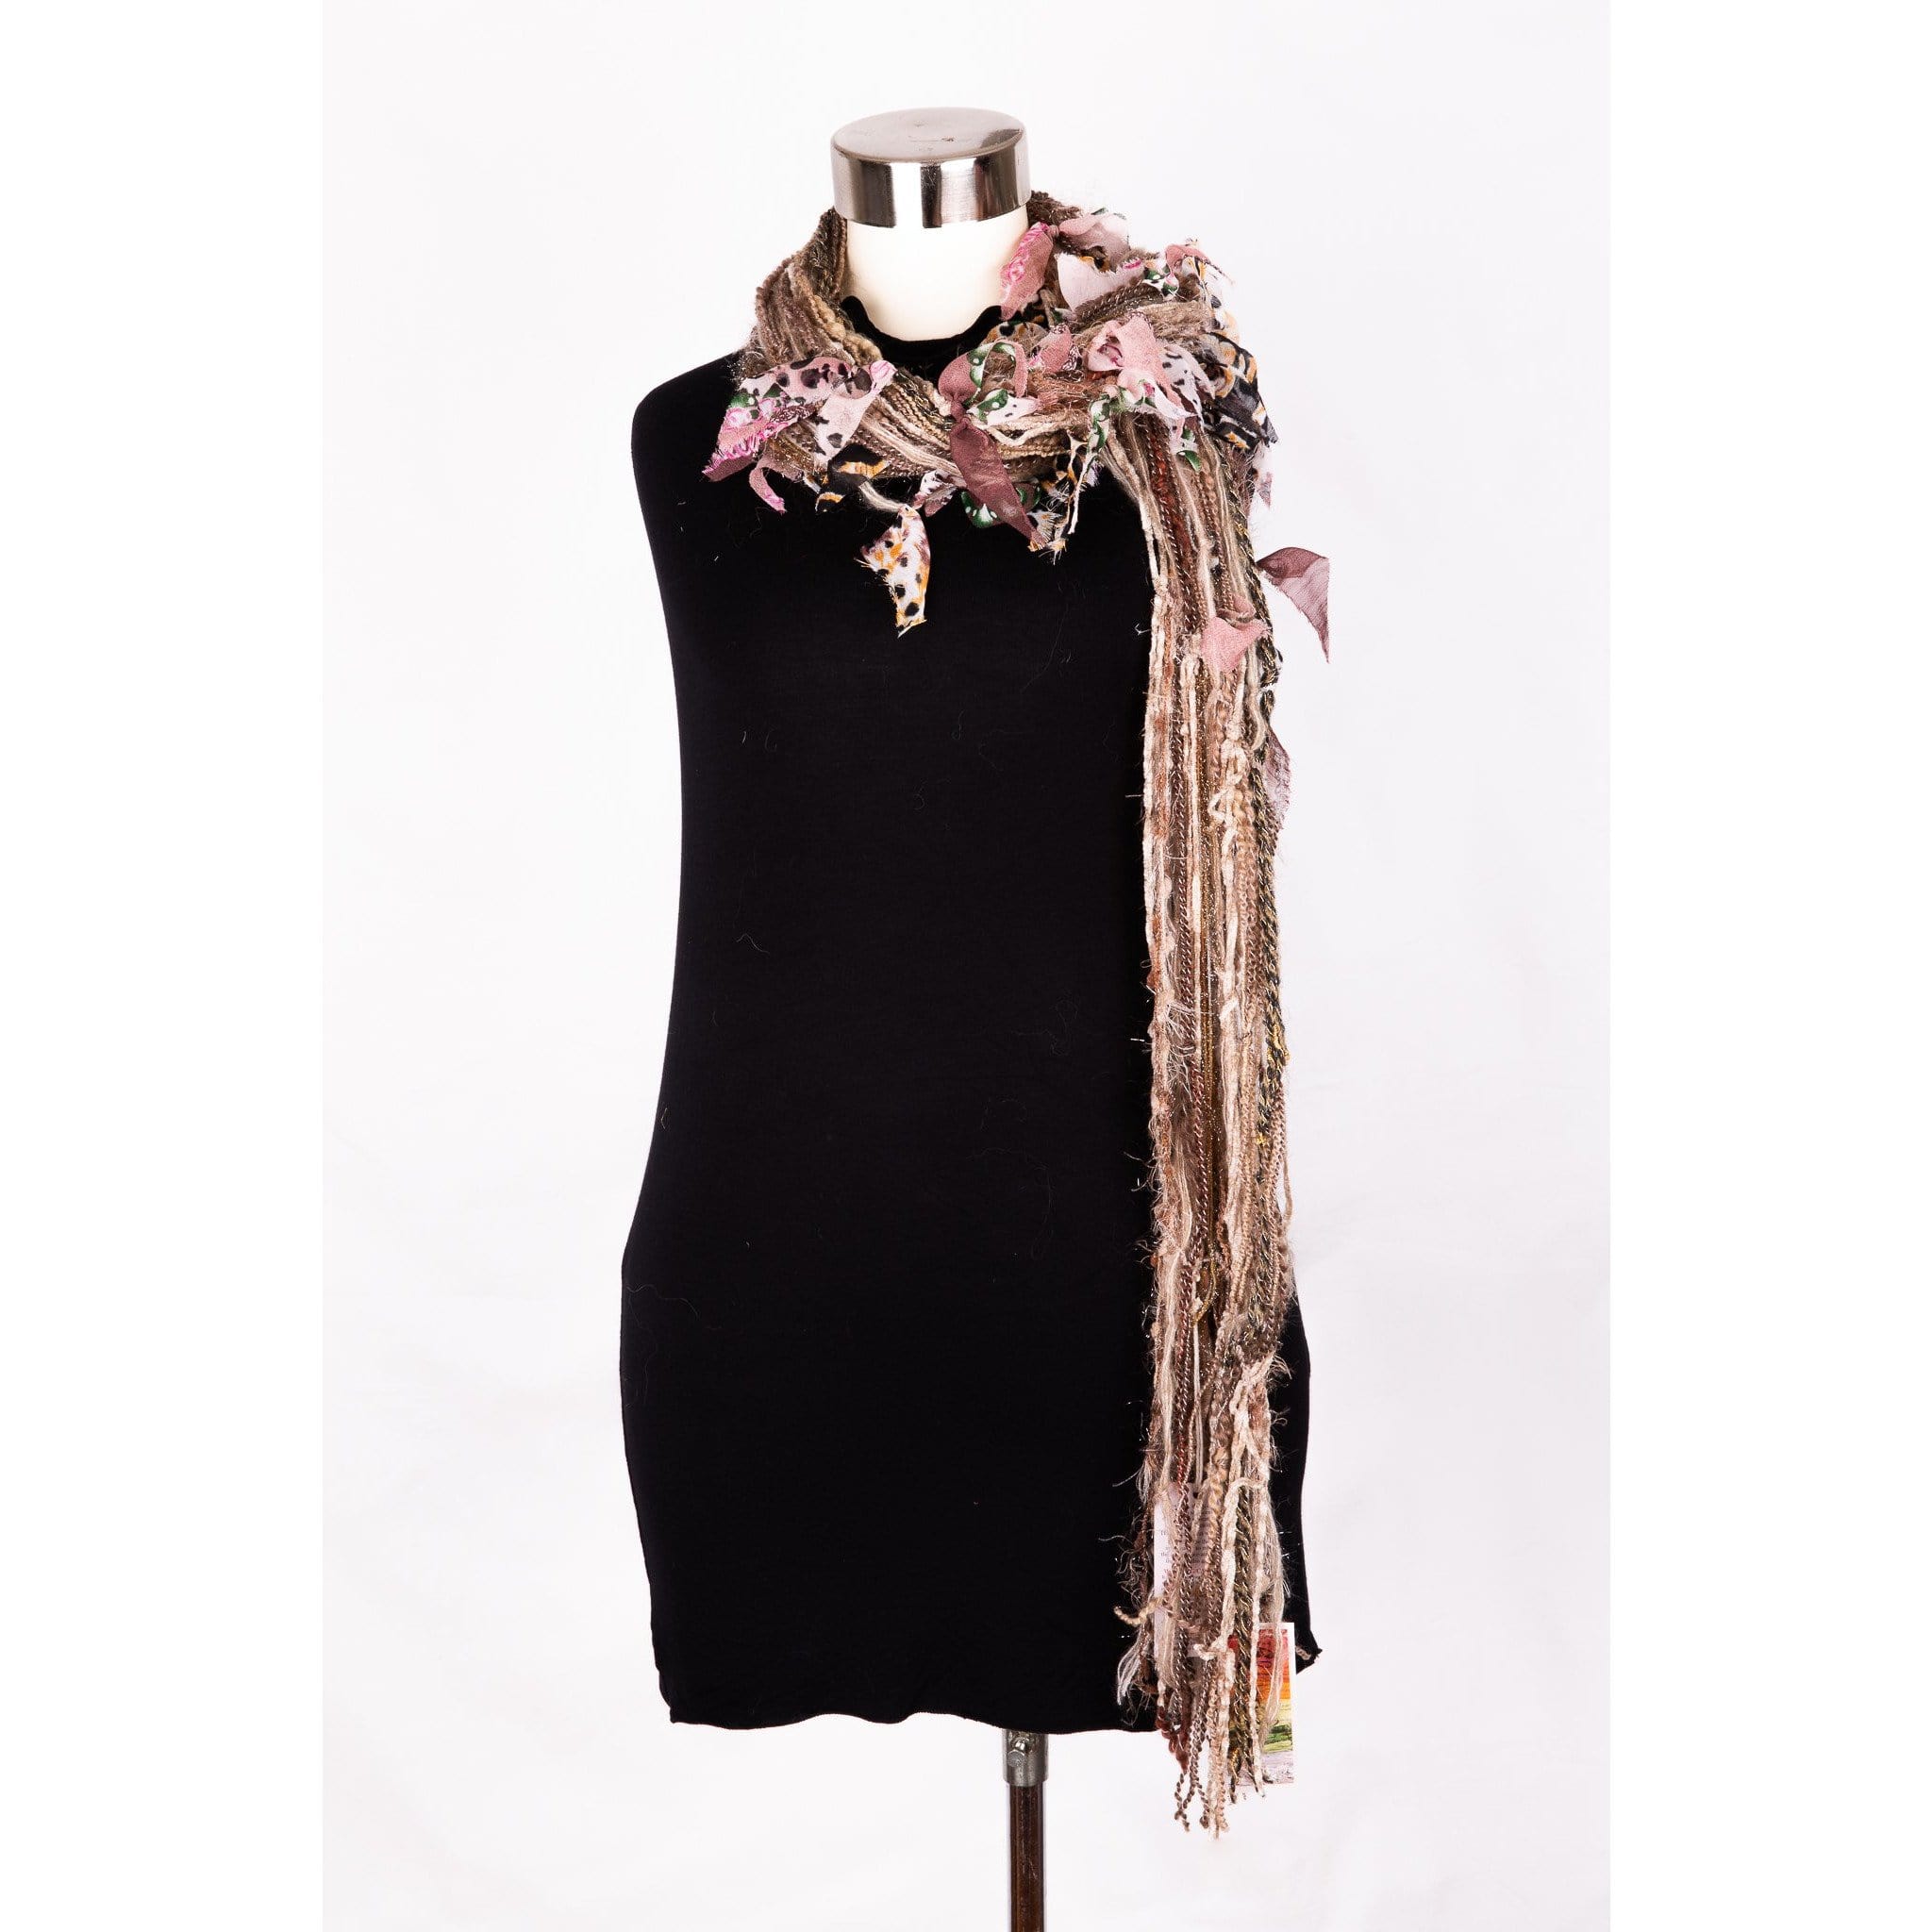 Scarf- Brown/ Cream/ Beige- Knotted multi-textile with lavender coloured leaf embellishments-Autumn/ Winter